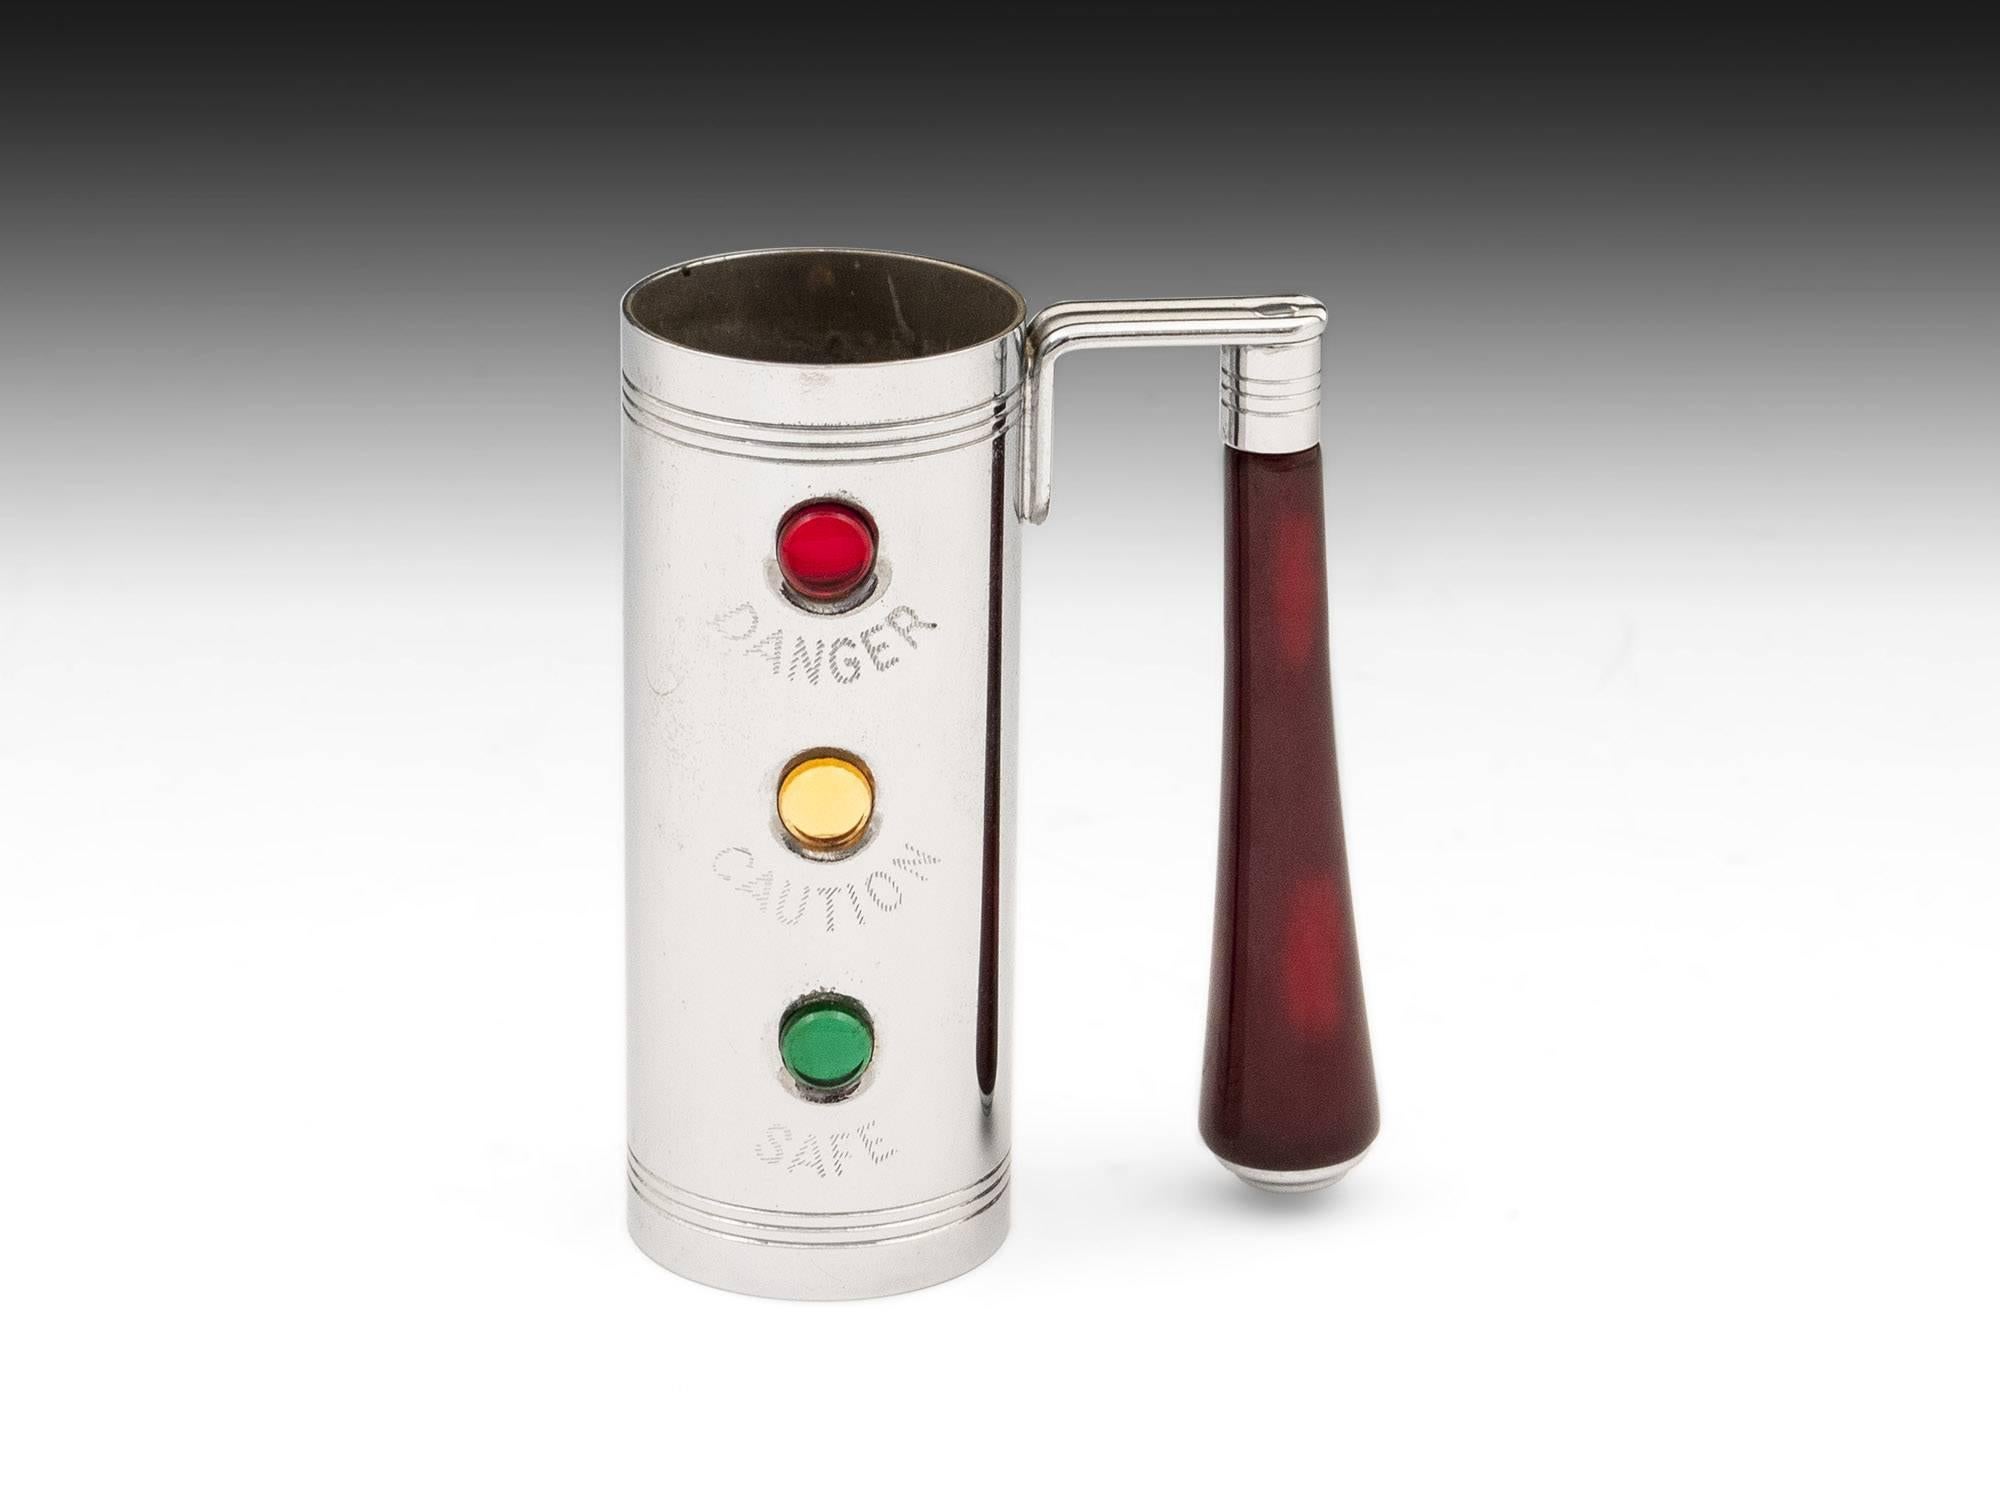 Novelty traffic light bar set By Glo Hill of Canada. Comprising a two chrome cylindrical Jiggers, one with a deep red bakelite handle, the other with an unusual bakelite golf club handle. Along with a bottle opener with another golf club style